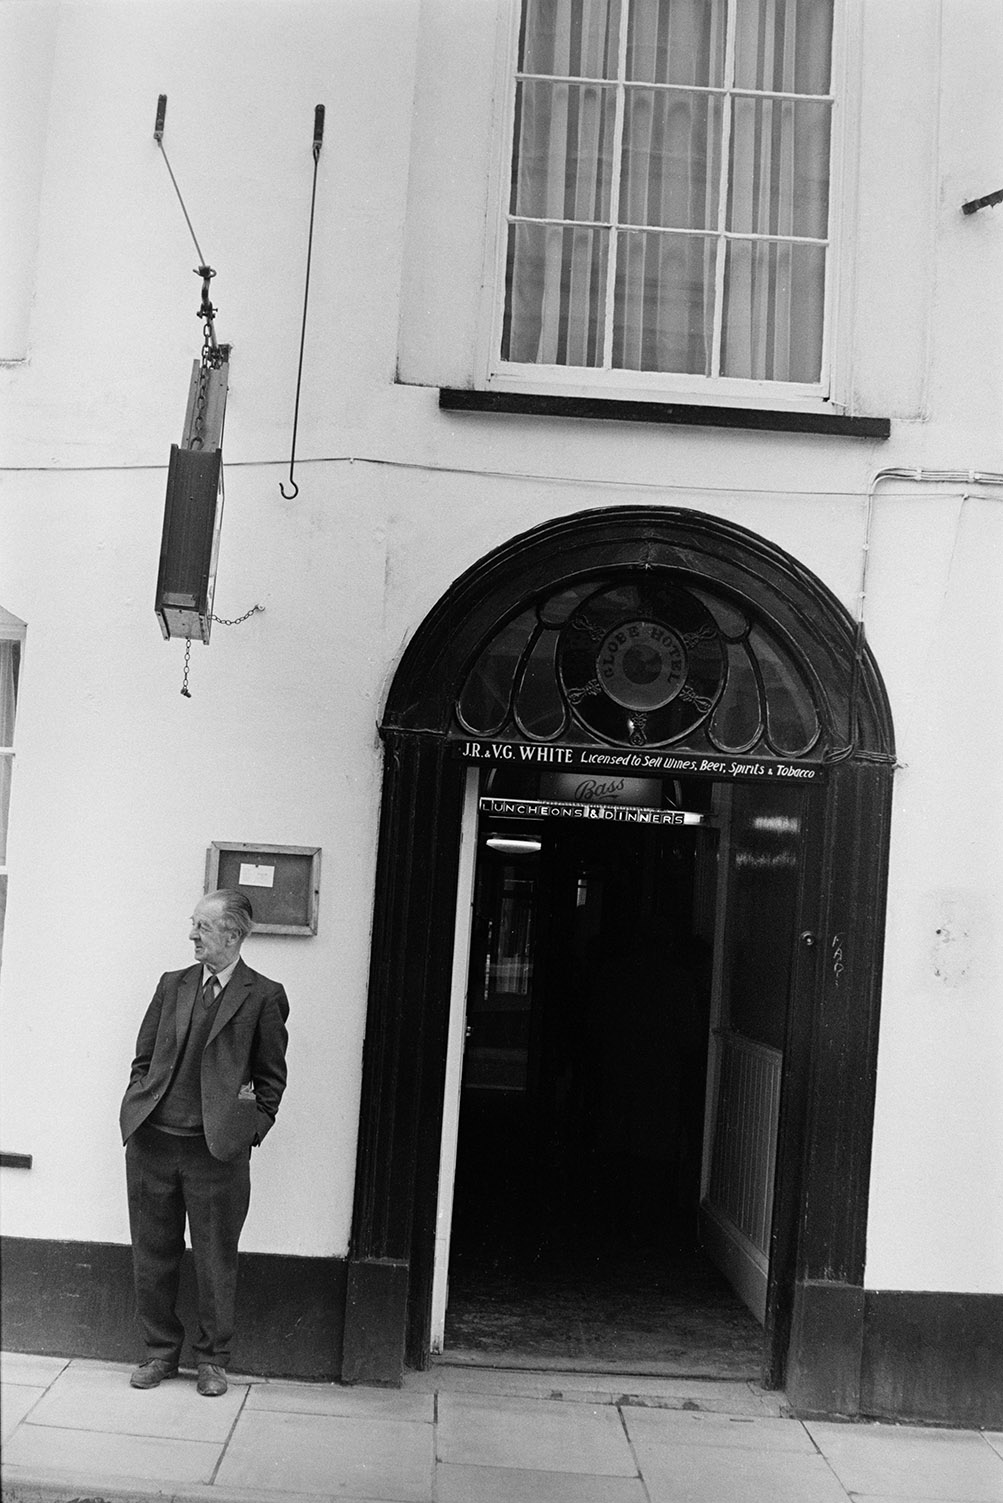 Man stood outside the entrance to the Globe Hotel. JR and VG White are the named licensees on the sign above the door.